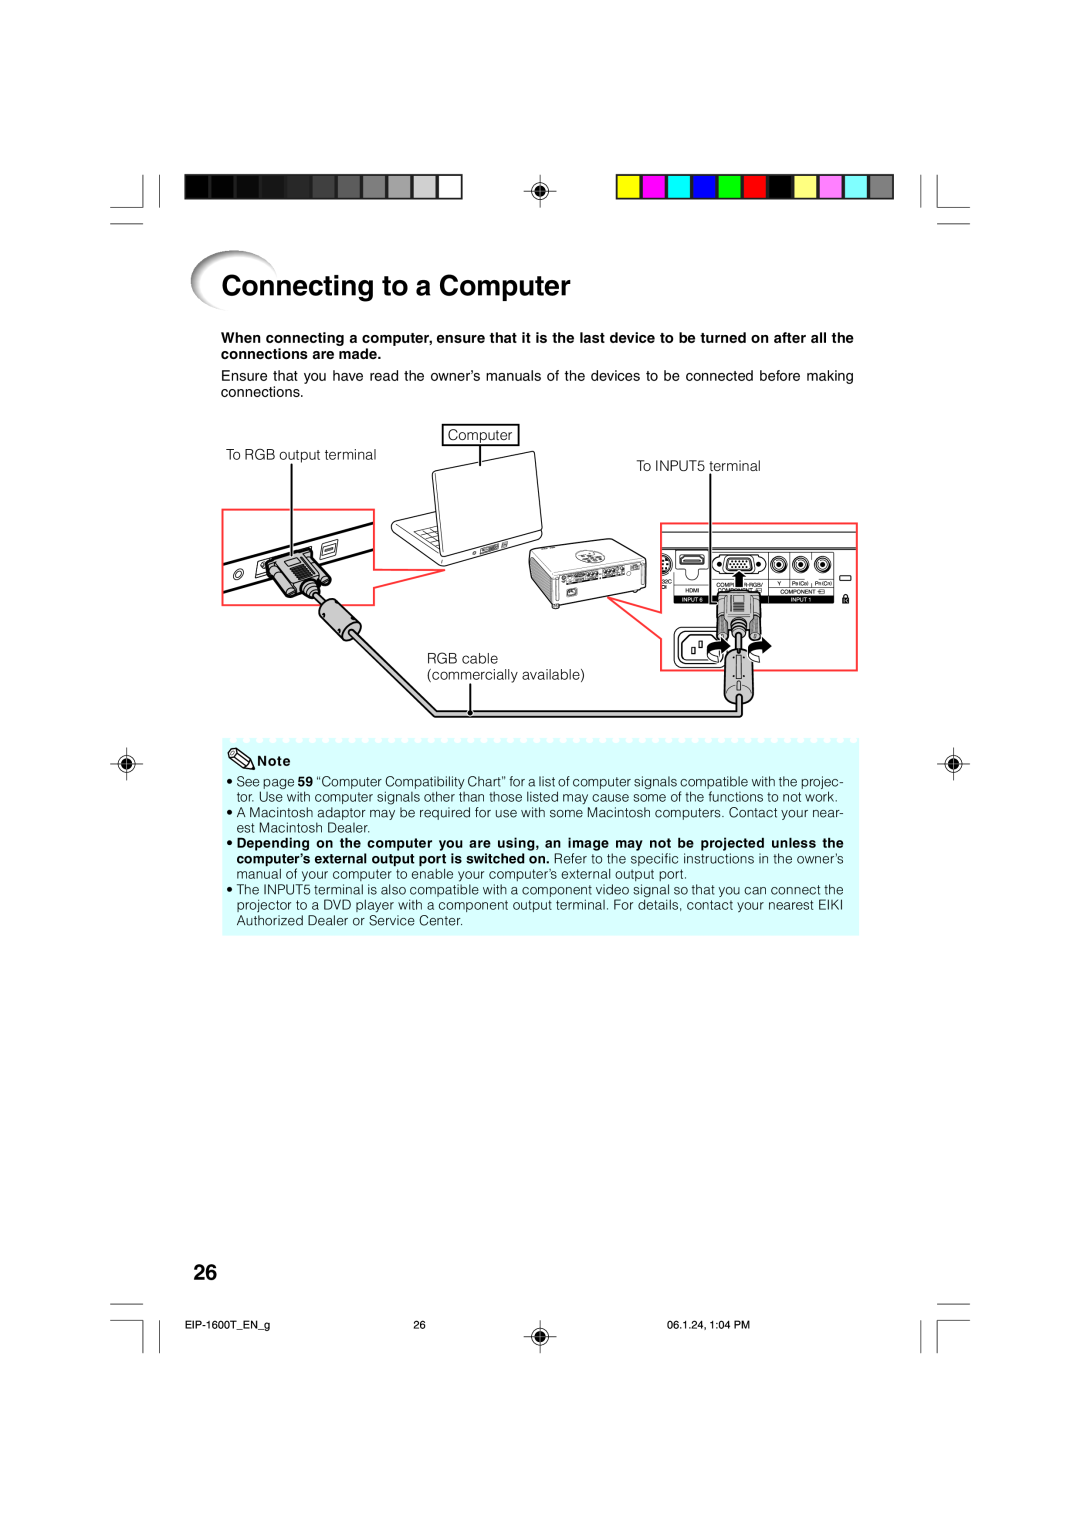 Eiki EIP-1600T owner manual Connecting to a Computer, accessory 